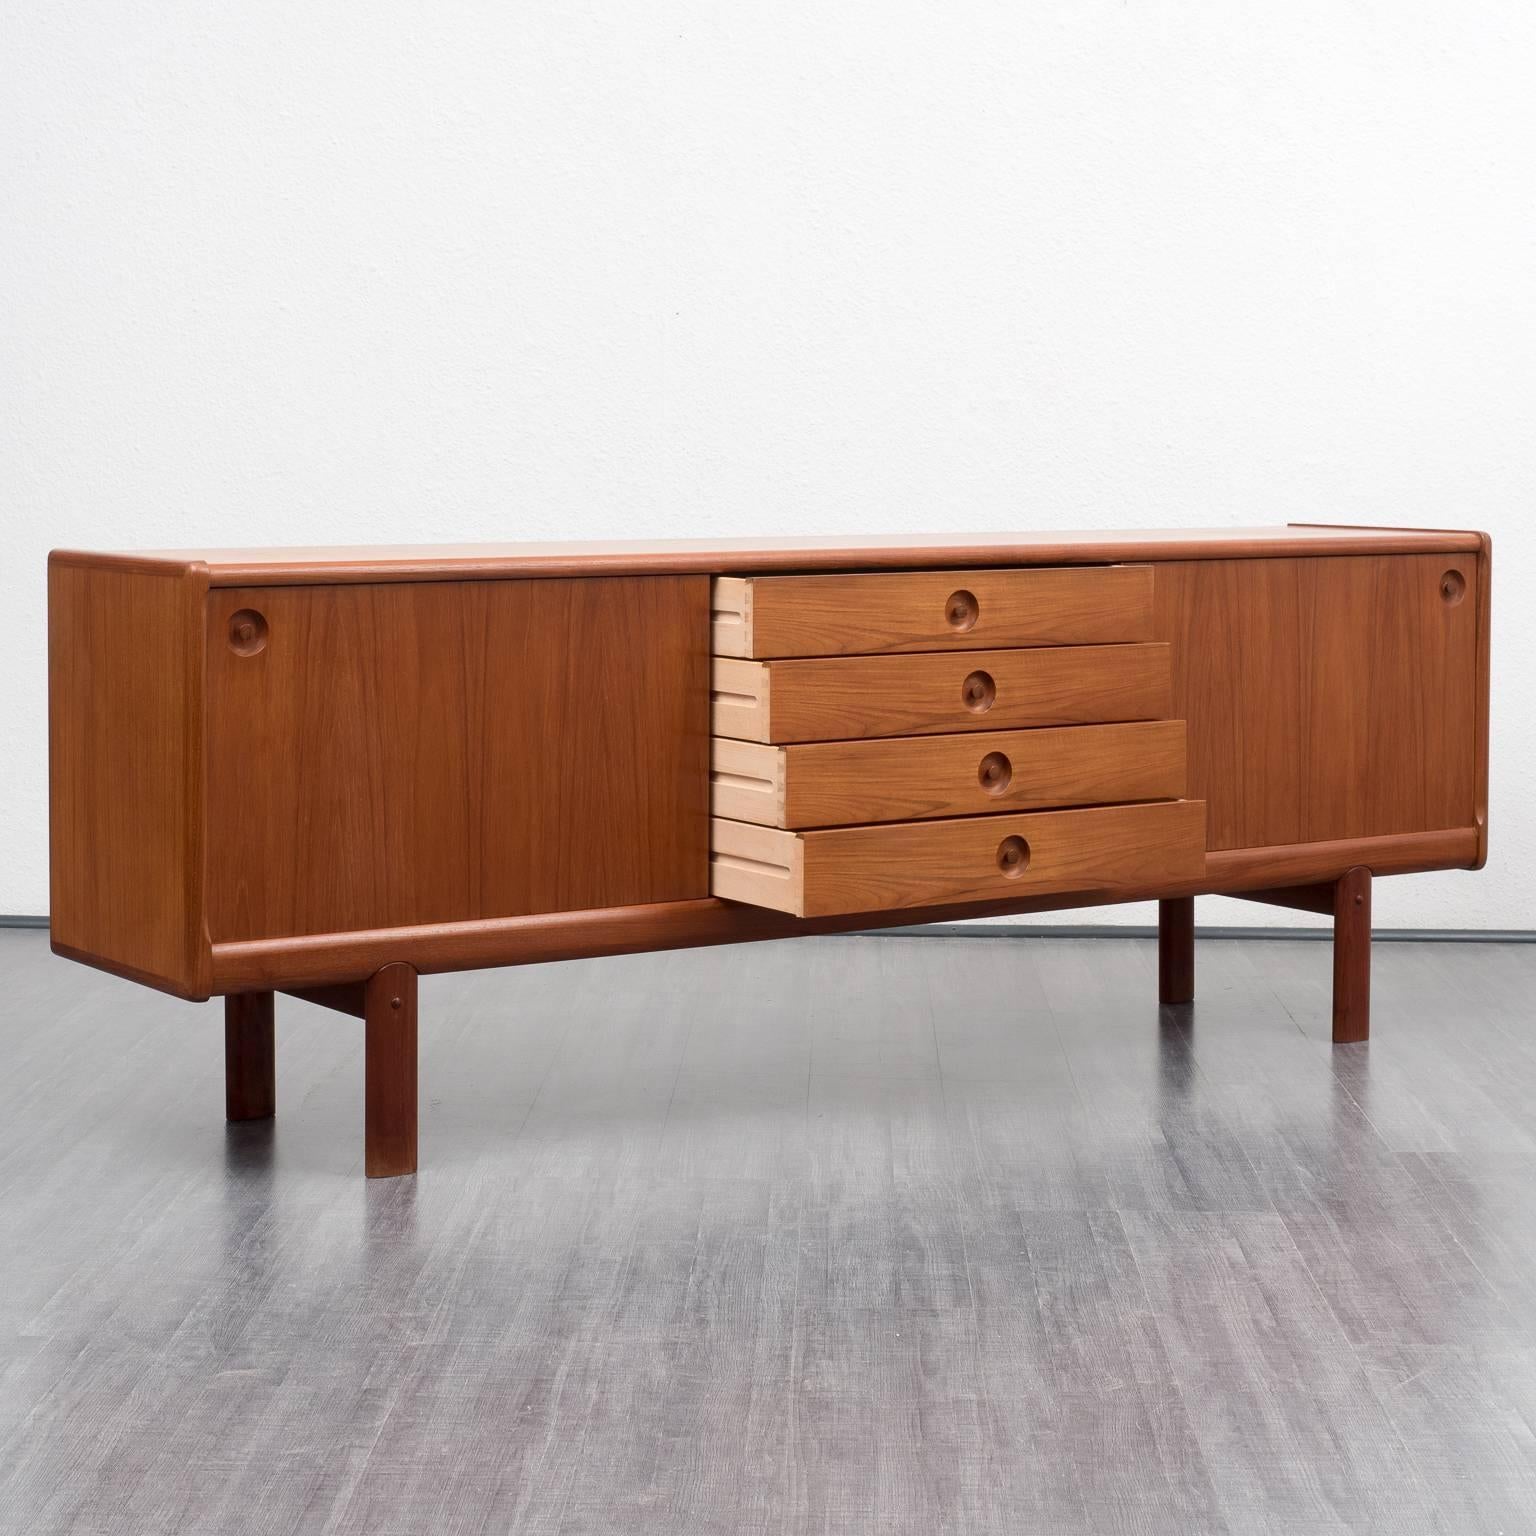 High-quality 1970s sideboard by Bramin, Danish design. Partly solid teak version with two sliding doors, four drawers and beautiful handles. The sideboard is free-standing due to a veneered back side.

Good condition with small traces of usage.